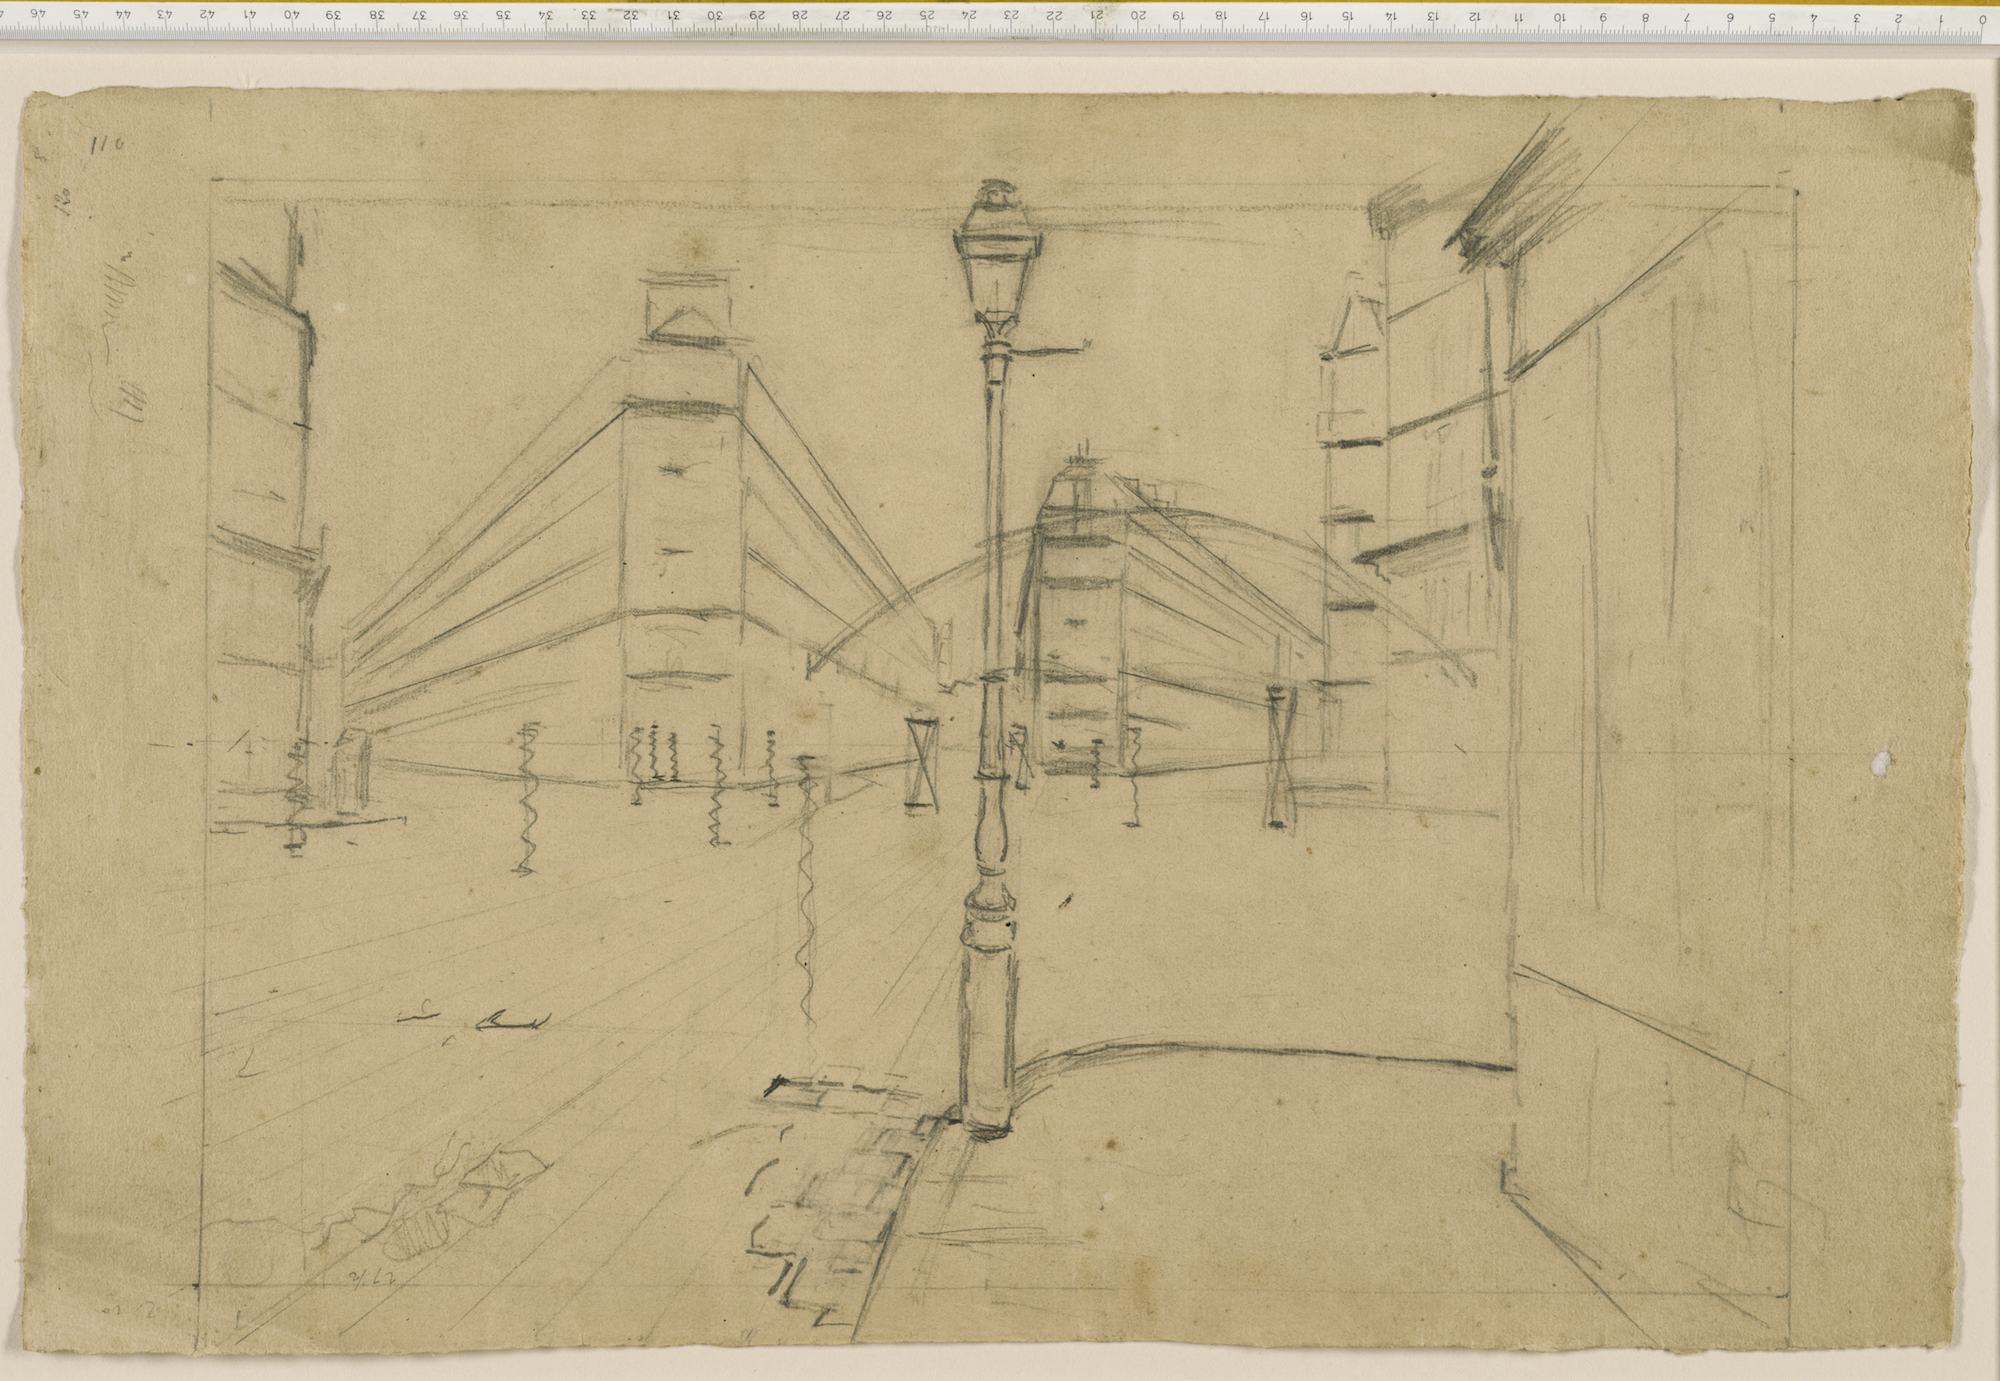  Gustave Caillebotte’s preparatory drawing for  Paris Street; Rainy Day  (1876-7), collection of The Art Institute of Chicago. 